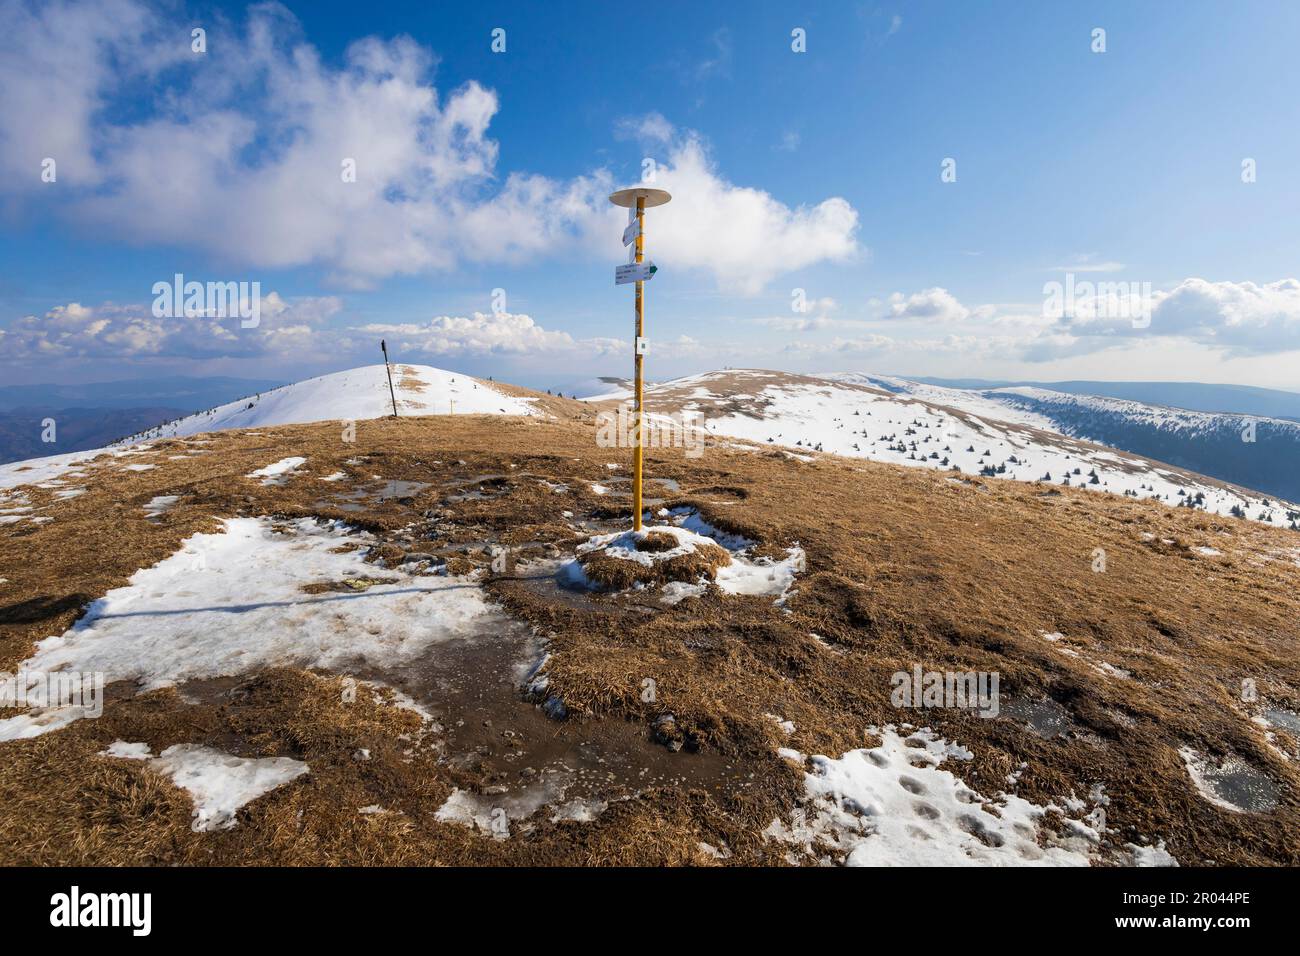 Ostredok, Velka Fatra, Slovakia, Europe - guidepost, signpost, signboard and board on the top of mountain and hill. Snow is melting in the spring. Sun Stock Photo